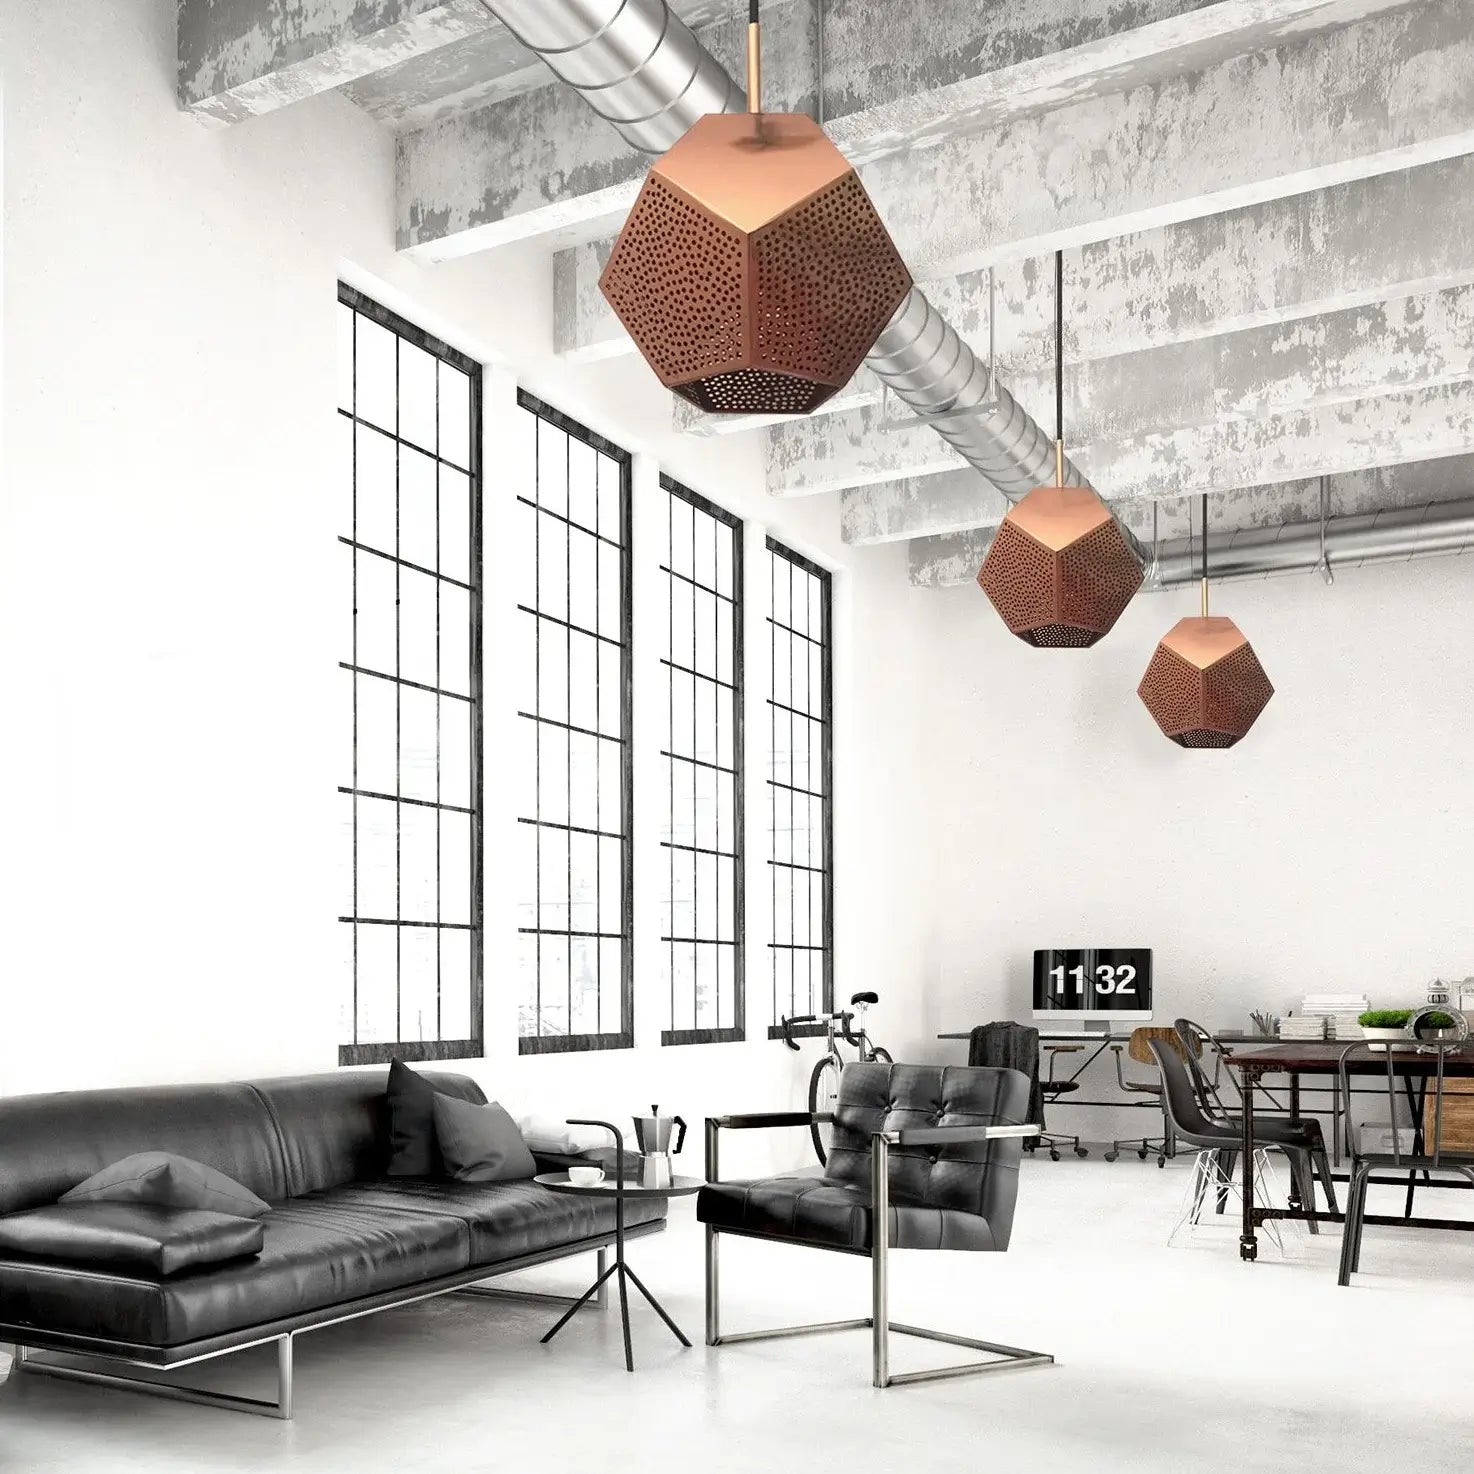 Dounia home Pendant light in Polished copper made of METAL, used as a living room lighting, Model: Ula